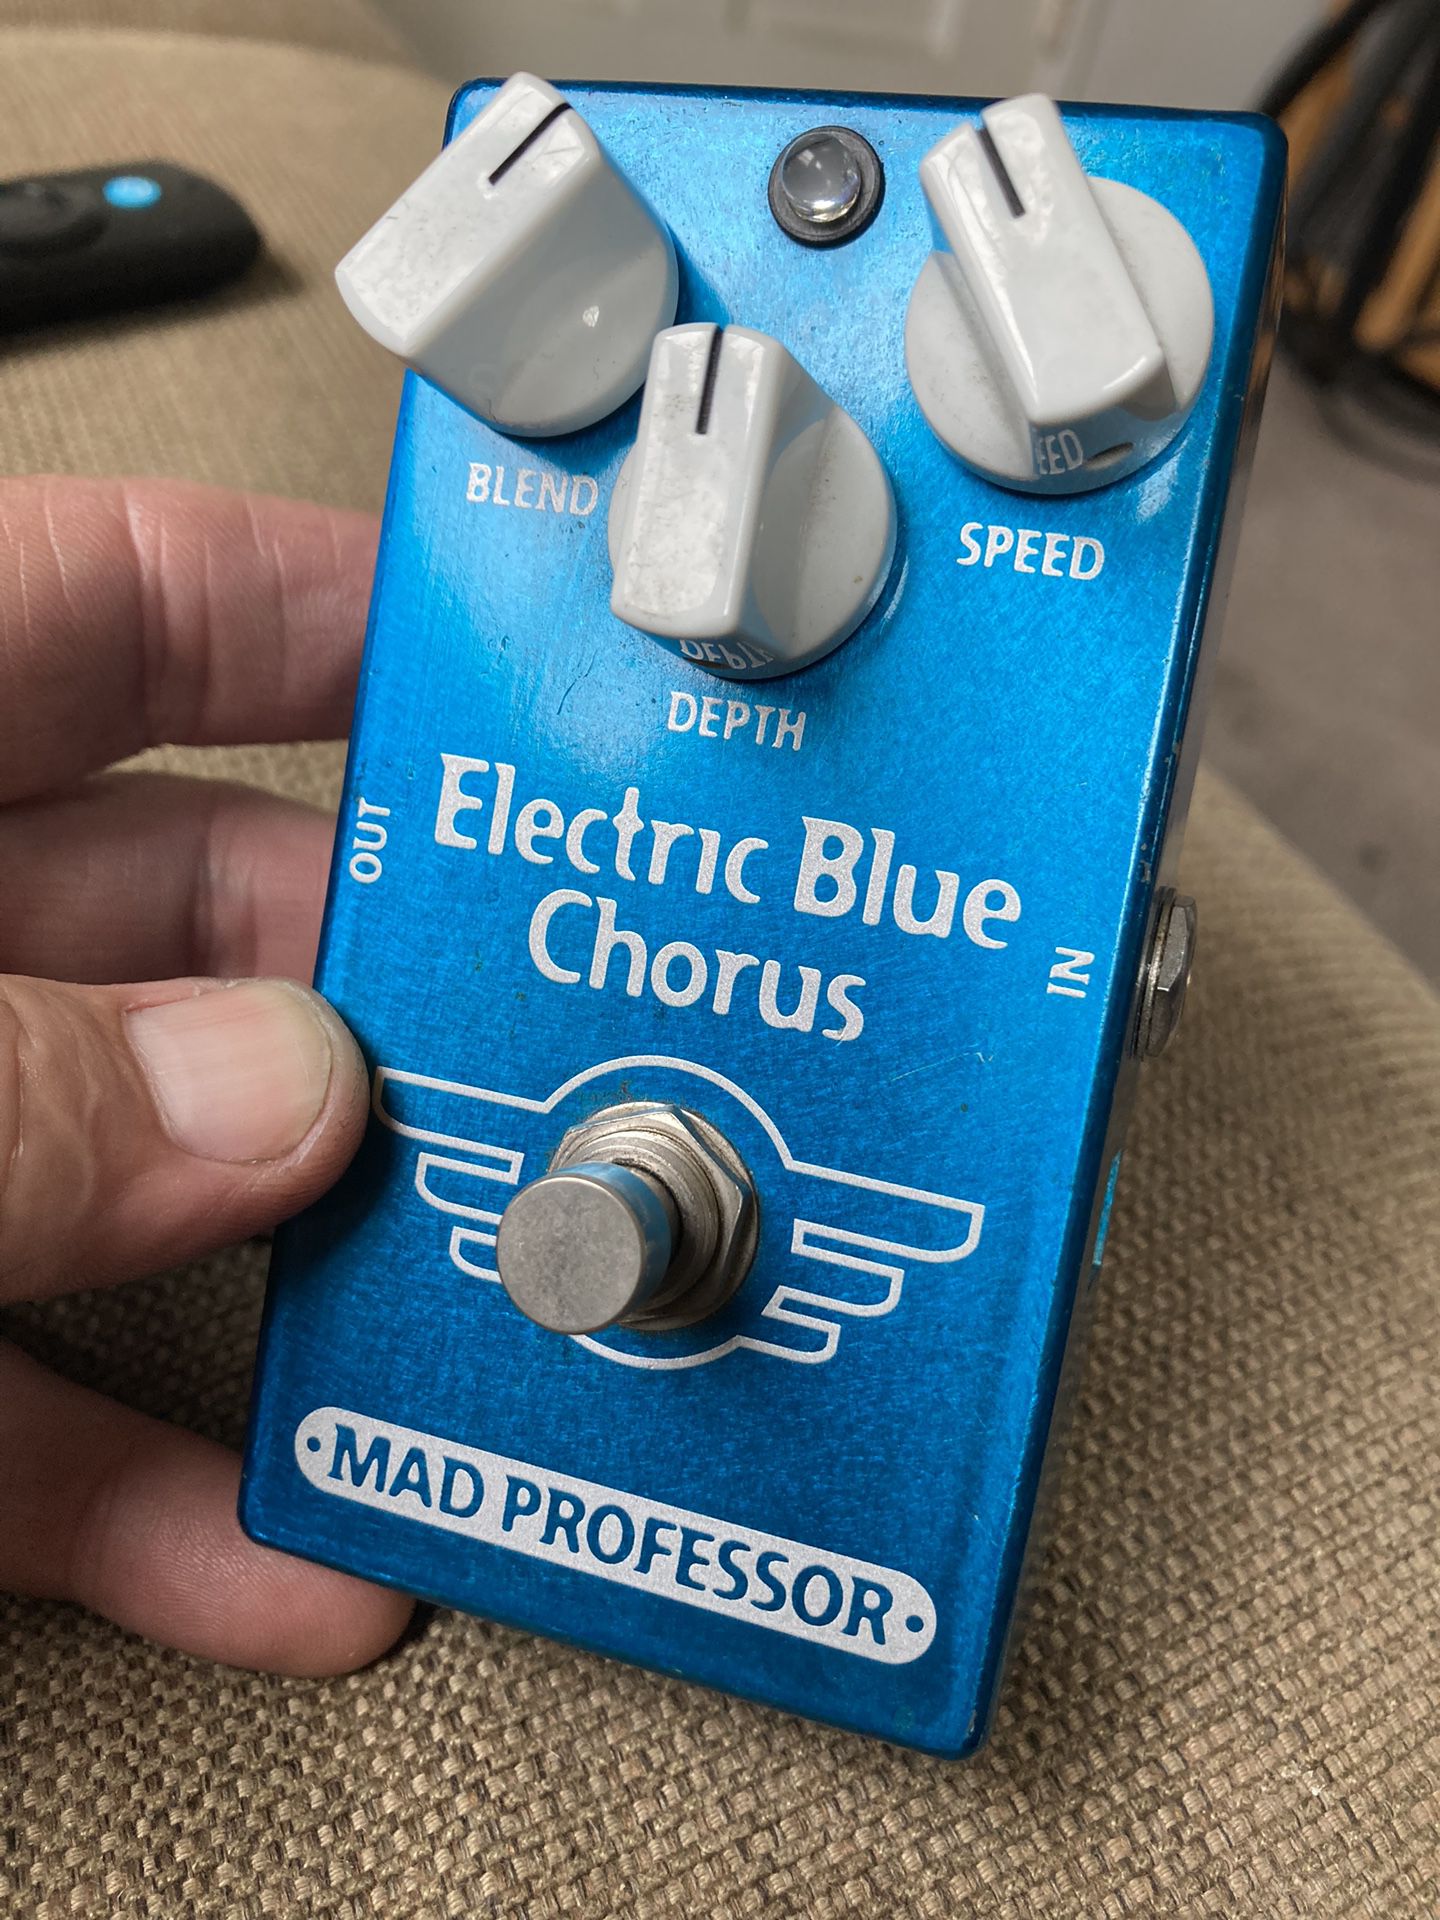 Electric Blue Chorus Pedal for Sale in Anaheim, CA - OfferUp